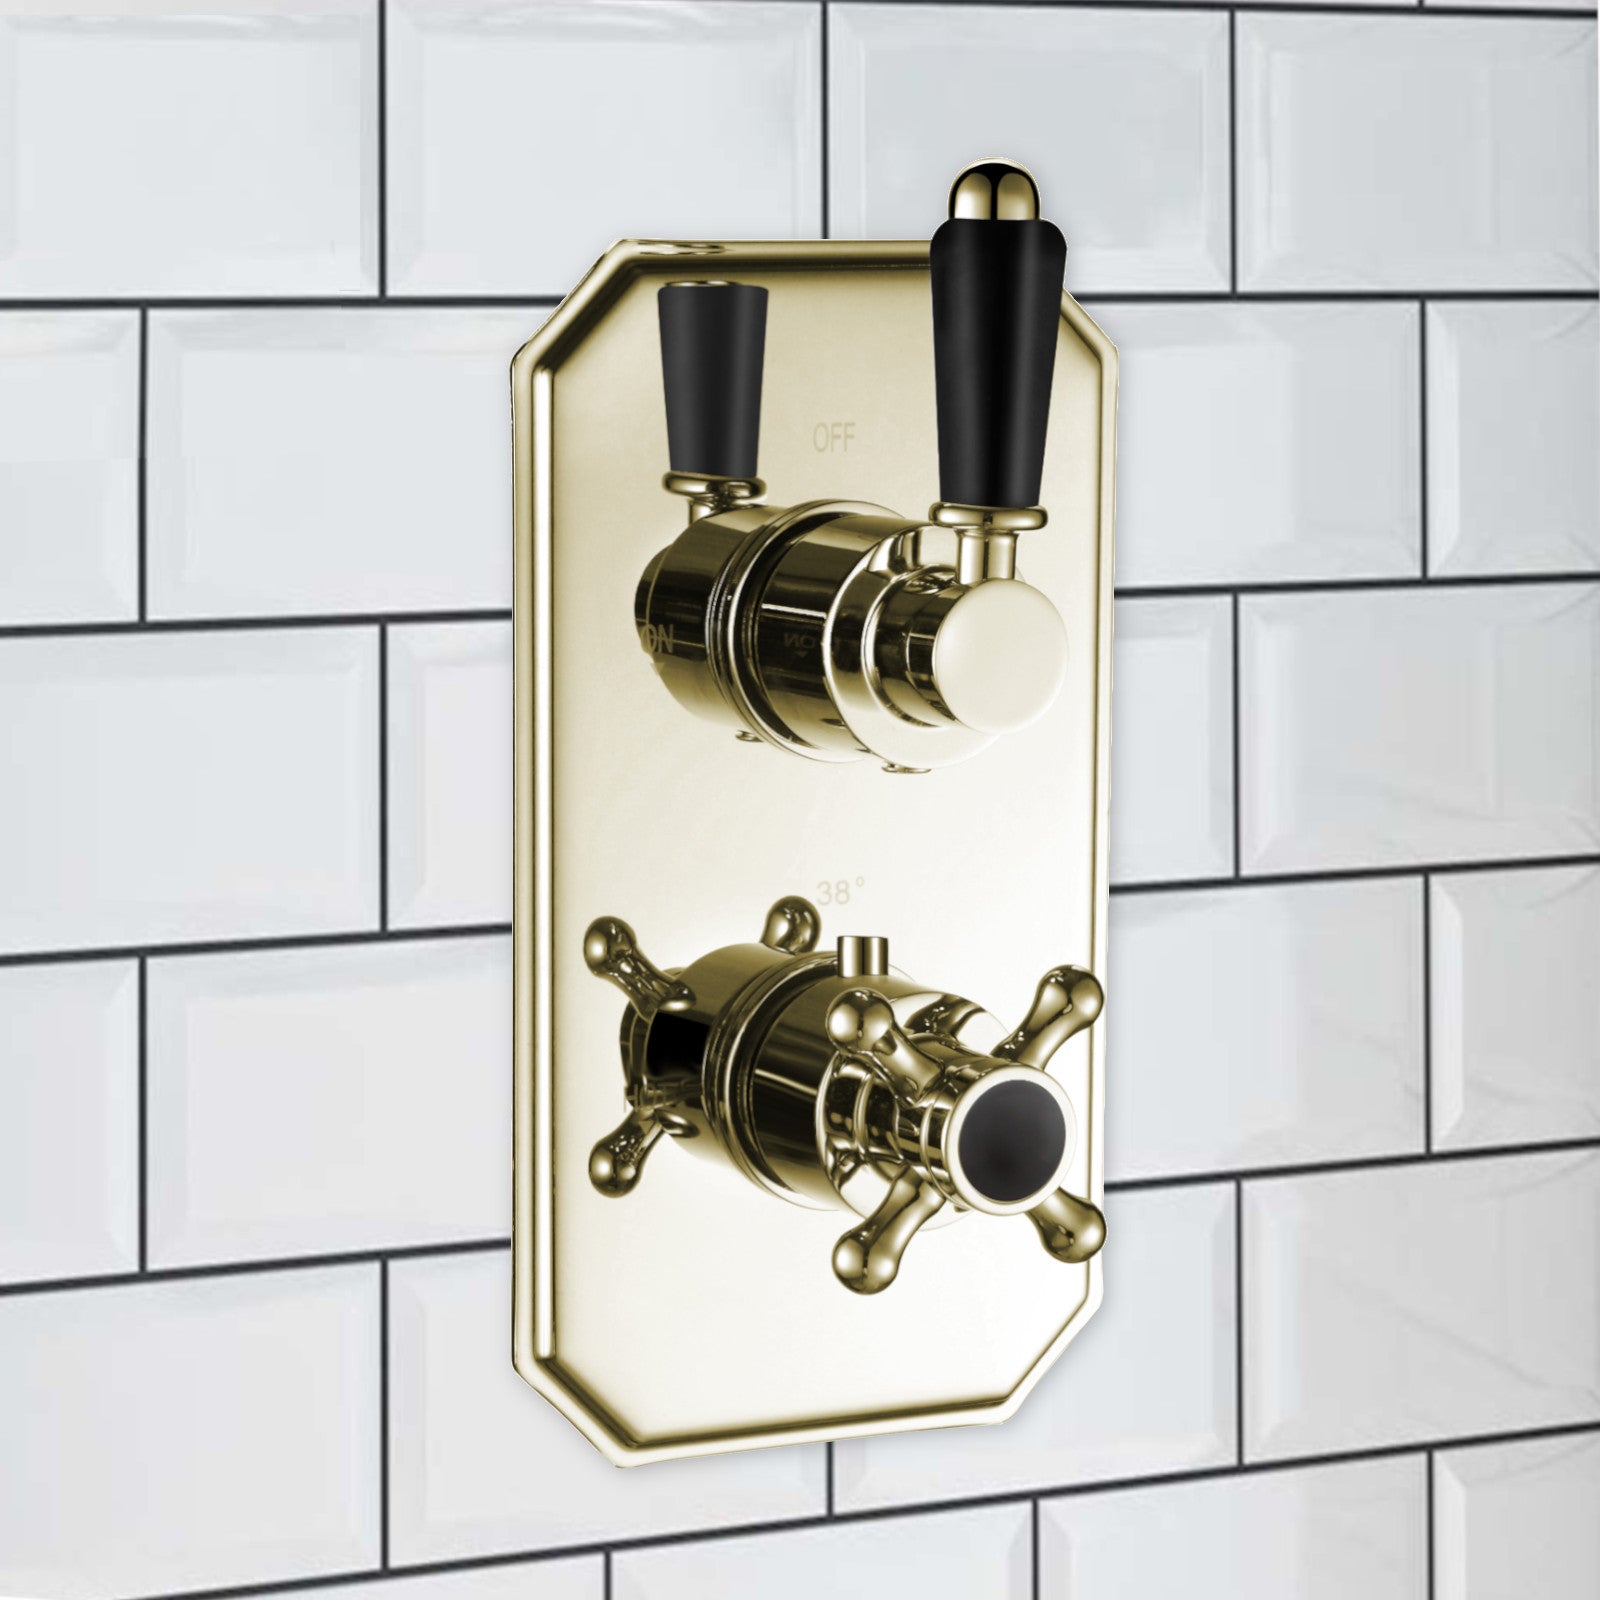 Regent traditional crosshead and black lever concealed thermostatic twin shower valve with 2 outlets - English gold - Showers